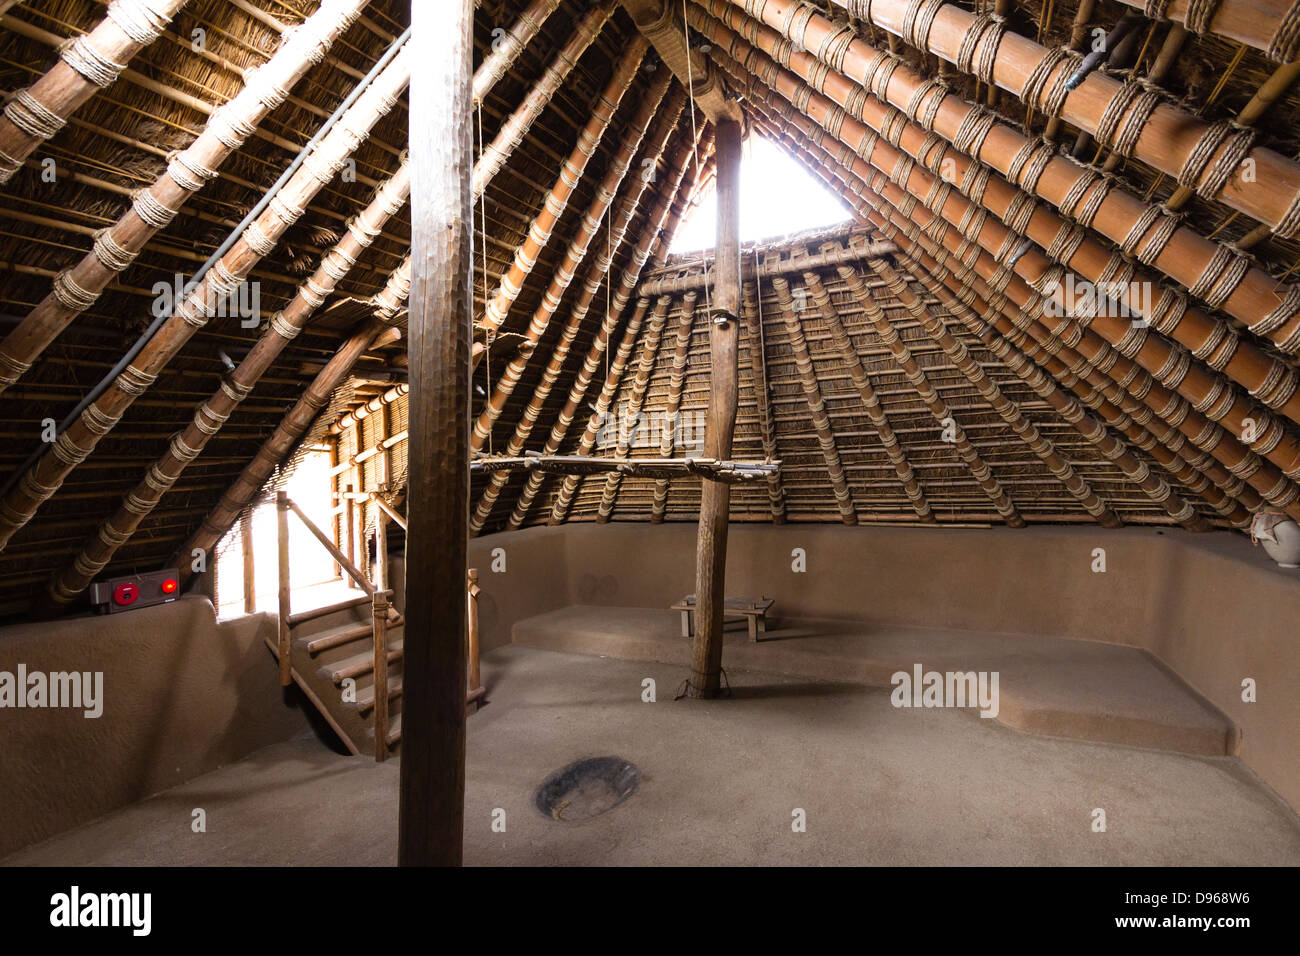 Interior of a  Yagoi period pit house dwelling at the Yoshinogari Park in Japan. Stone age thatched roof structure with earthen sides and floor. Stock Photo